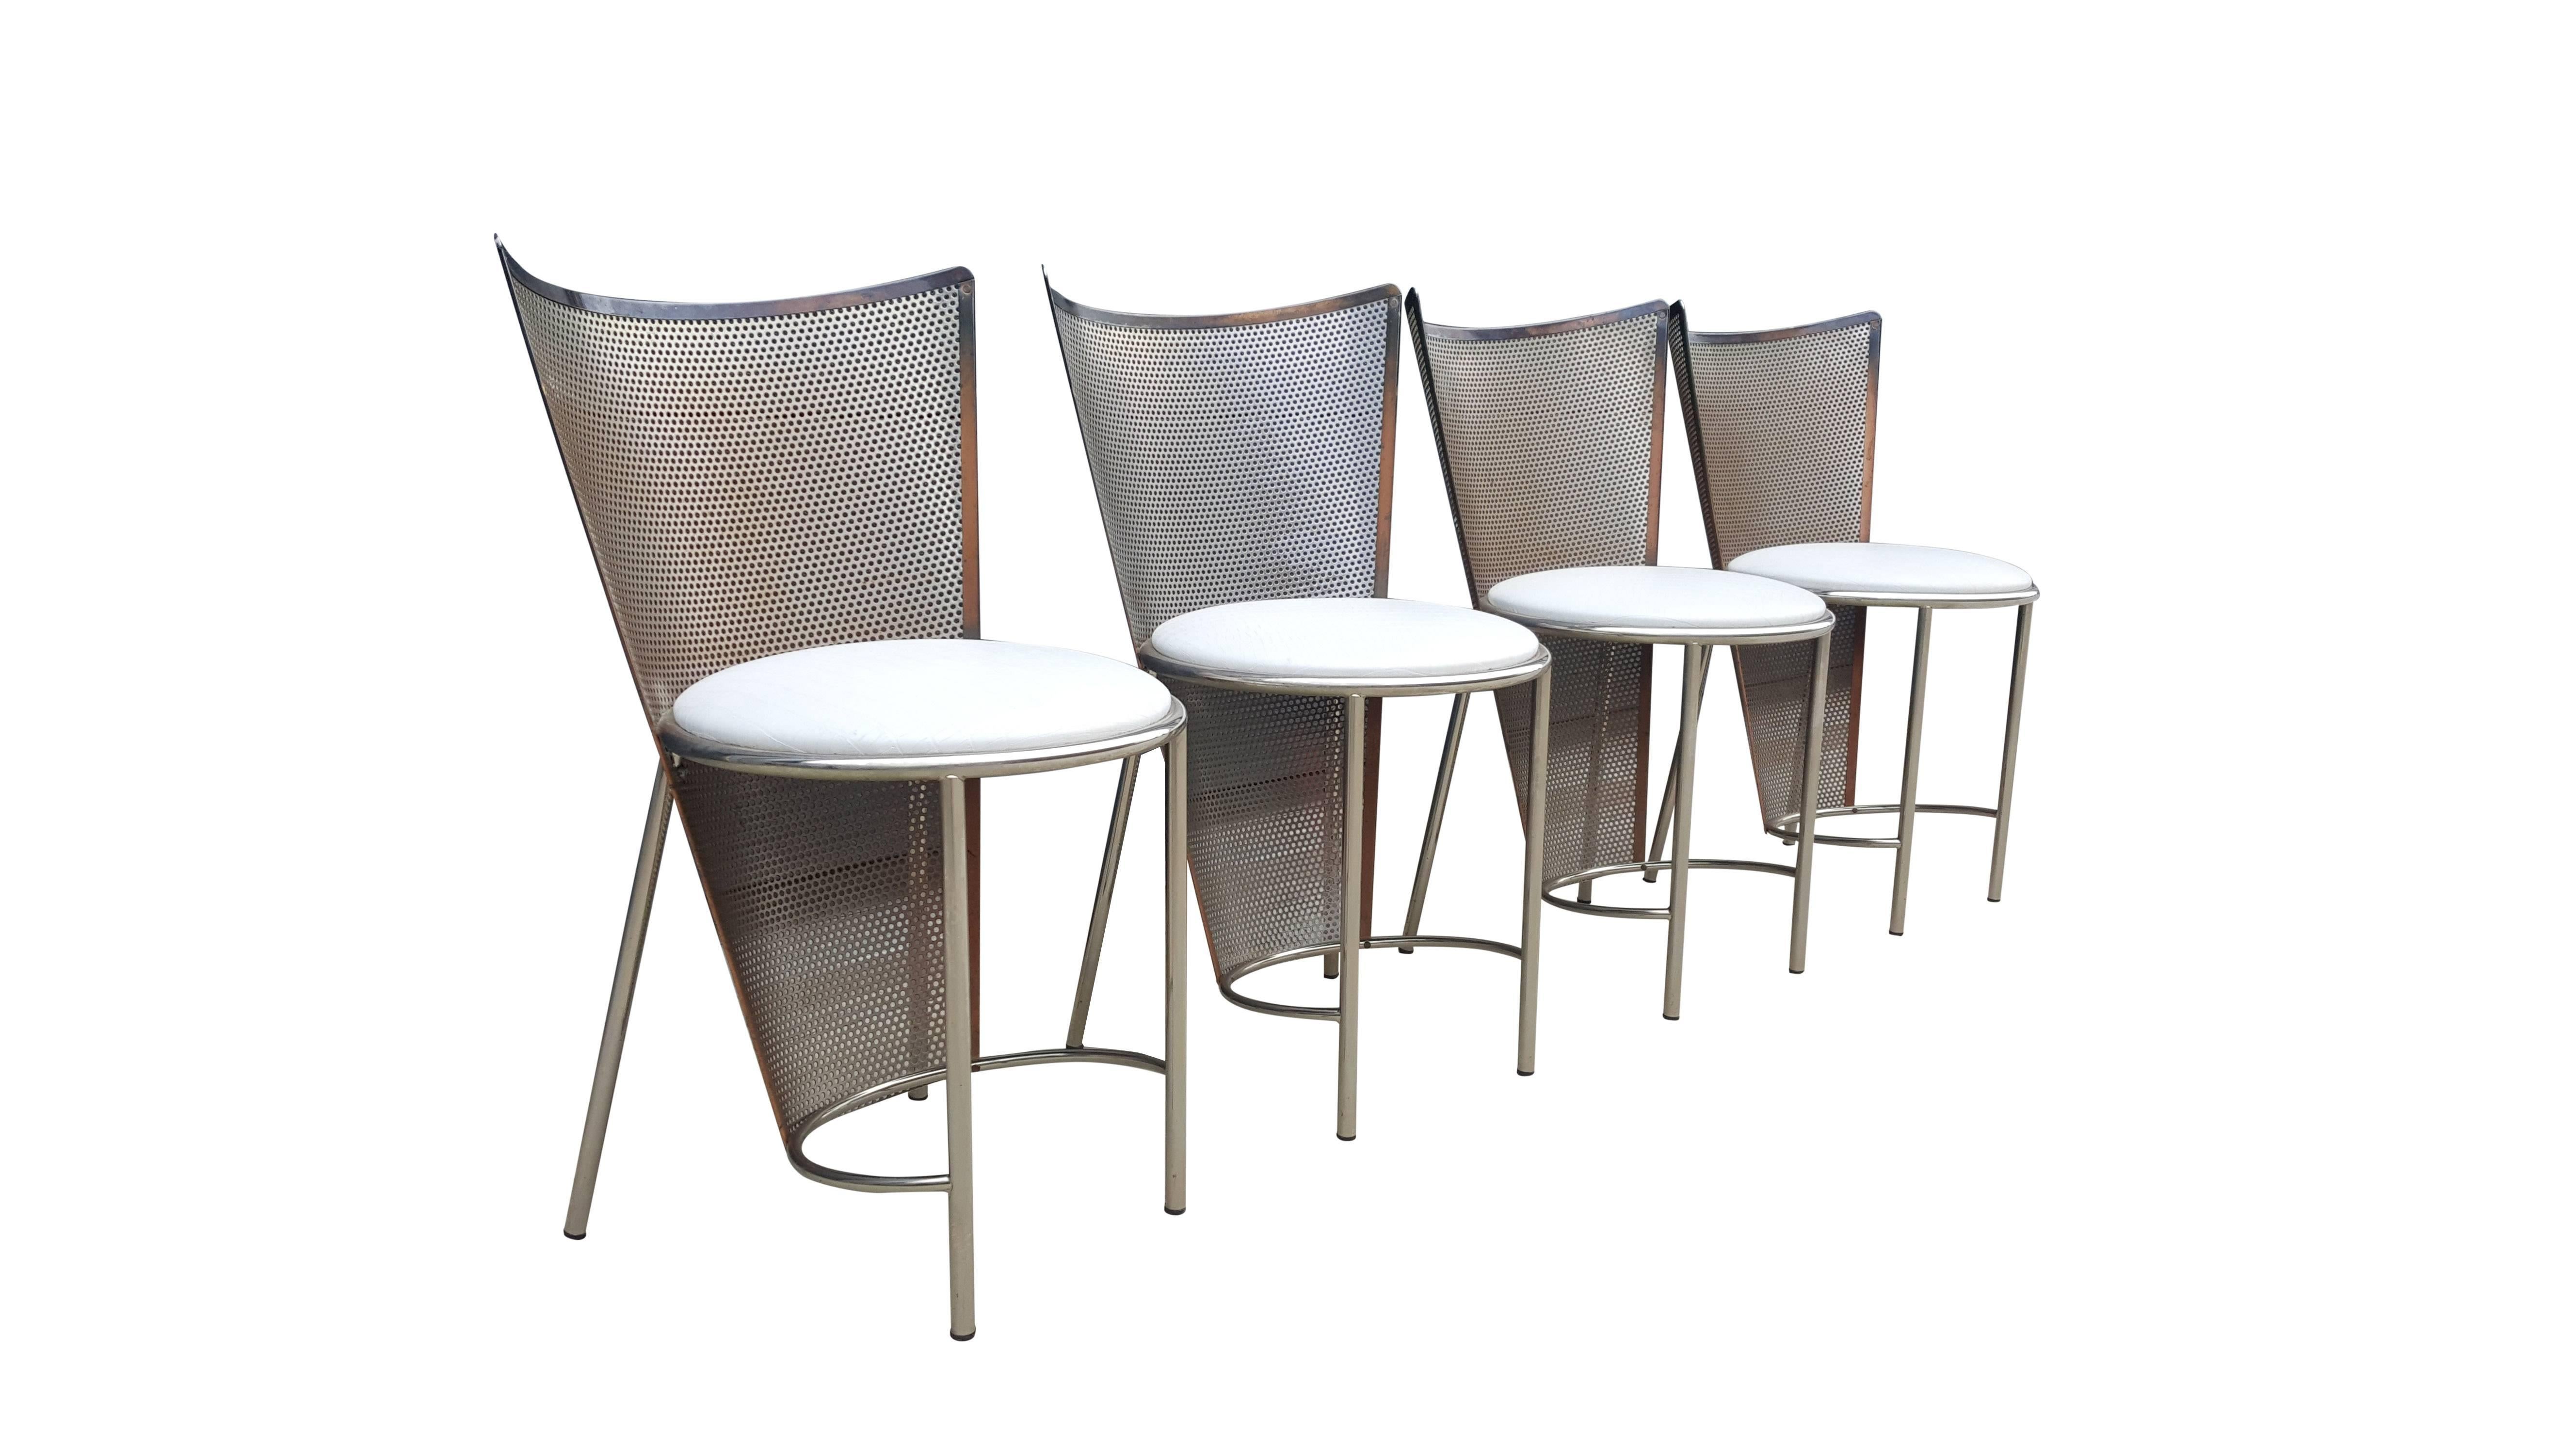 Belgian Set of Four Chairs, Belgo Chrome, World Expo, Mid-Century Modern For Sale